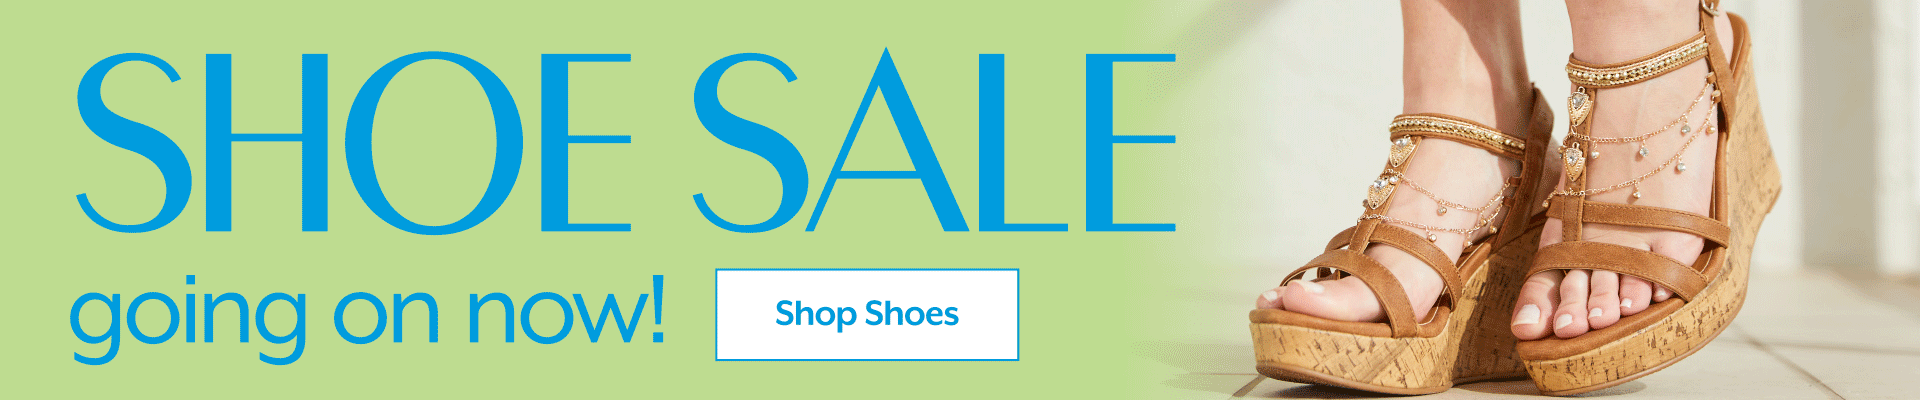 Shoe Sale Going on Now!